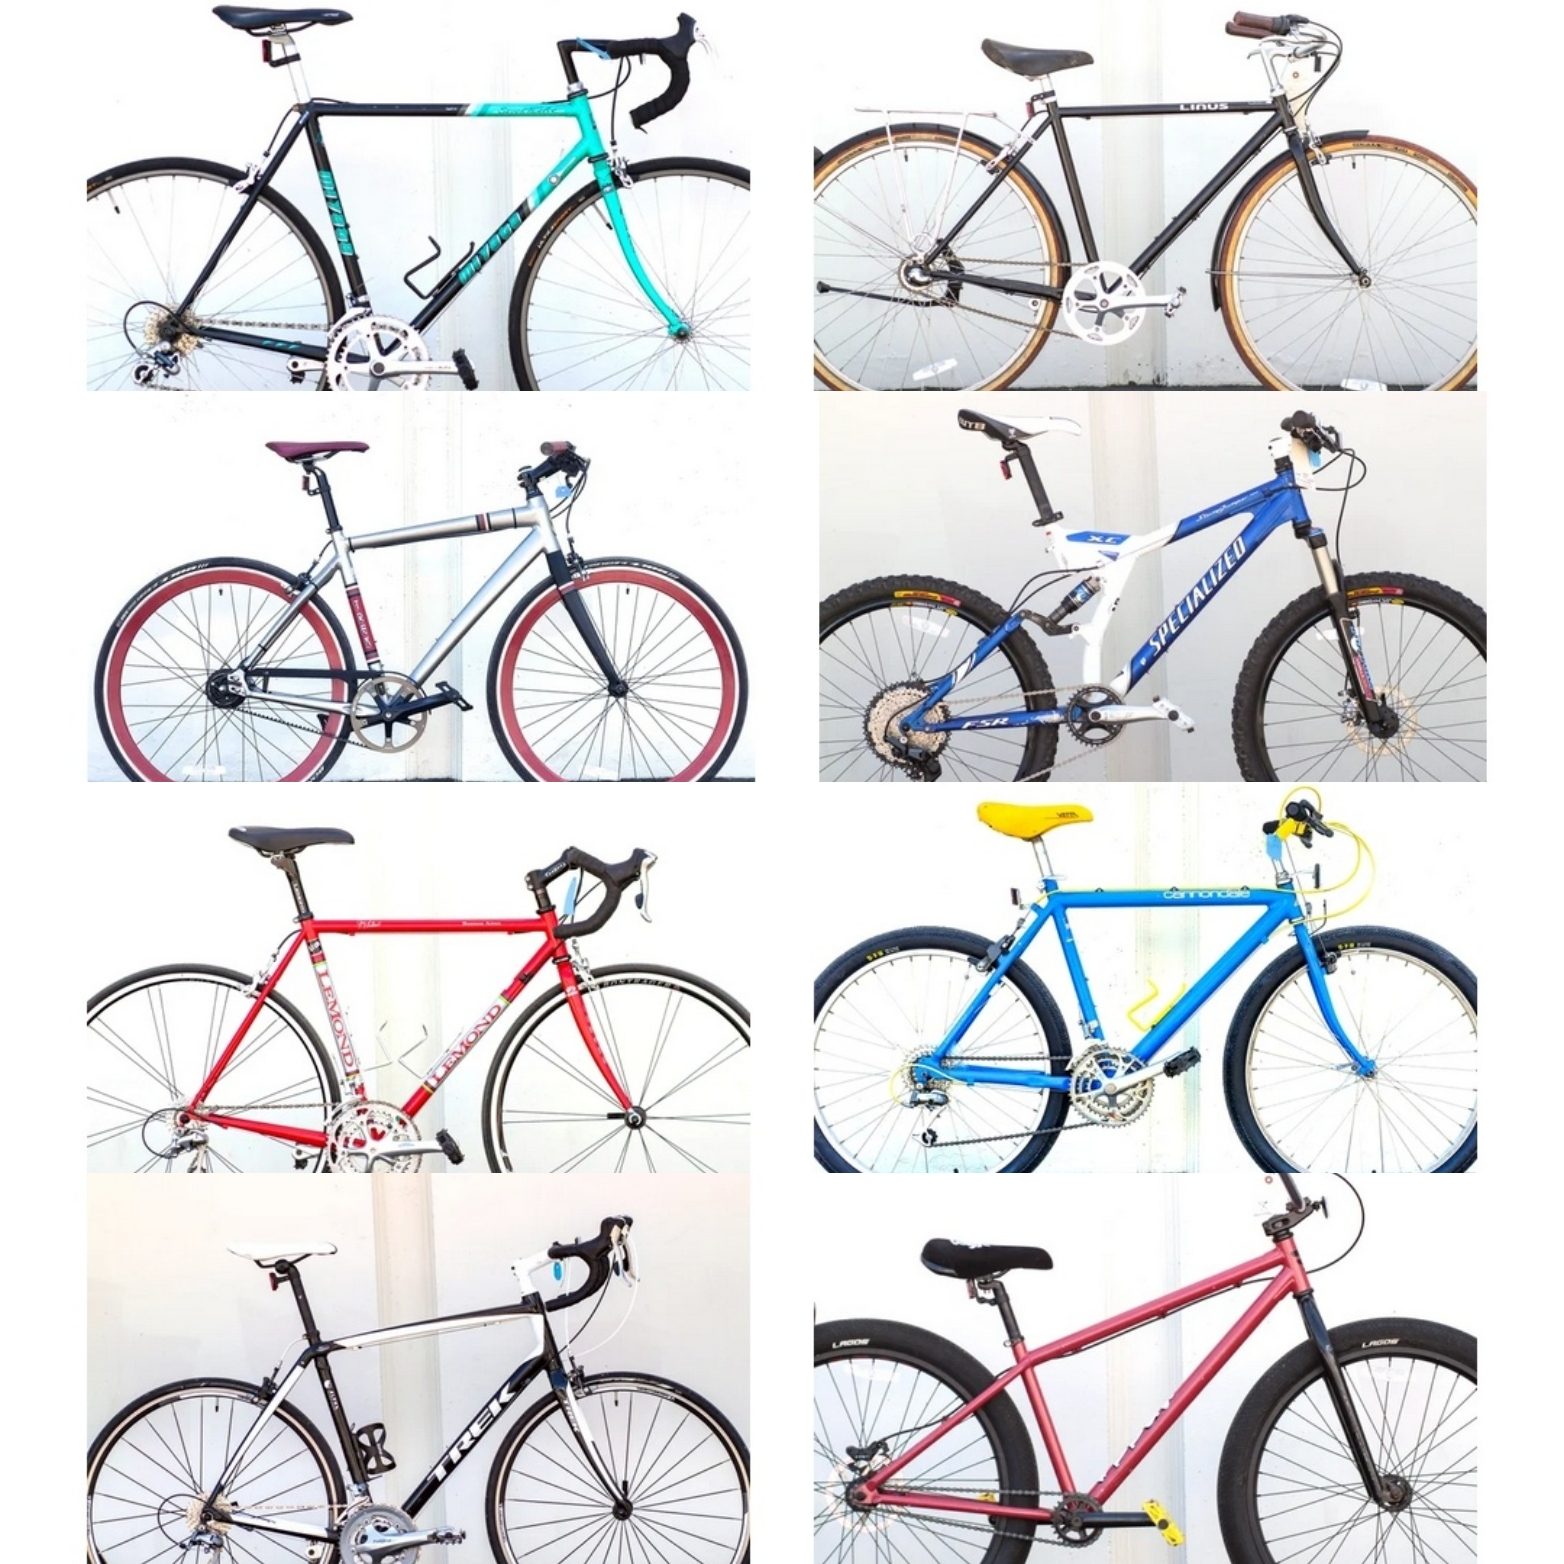 Get a great deal on a refurbished bike for all of May! 